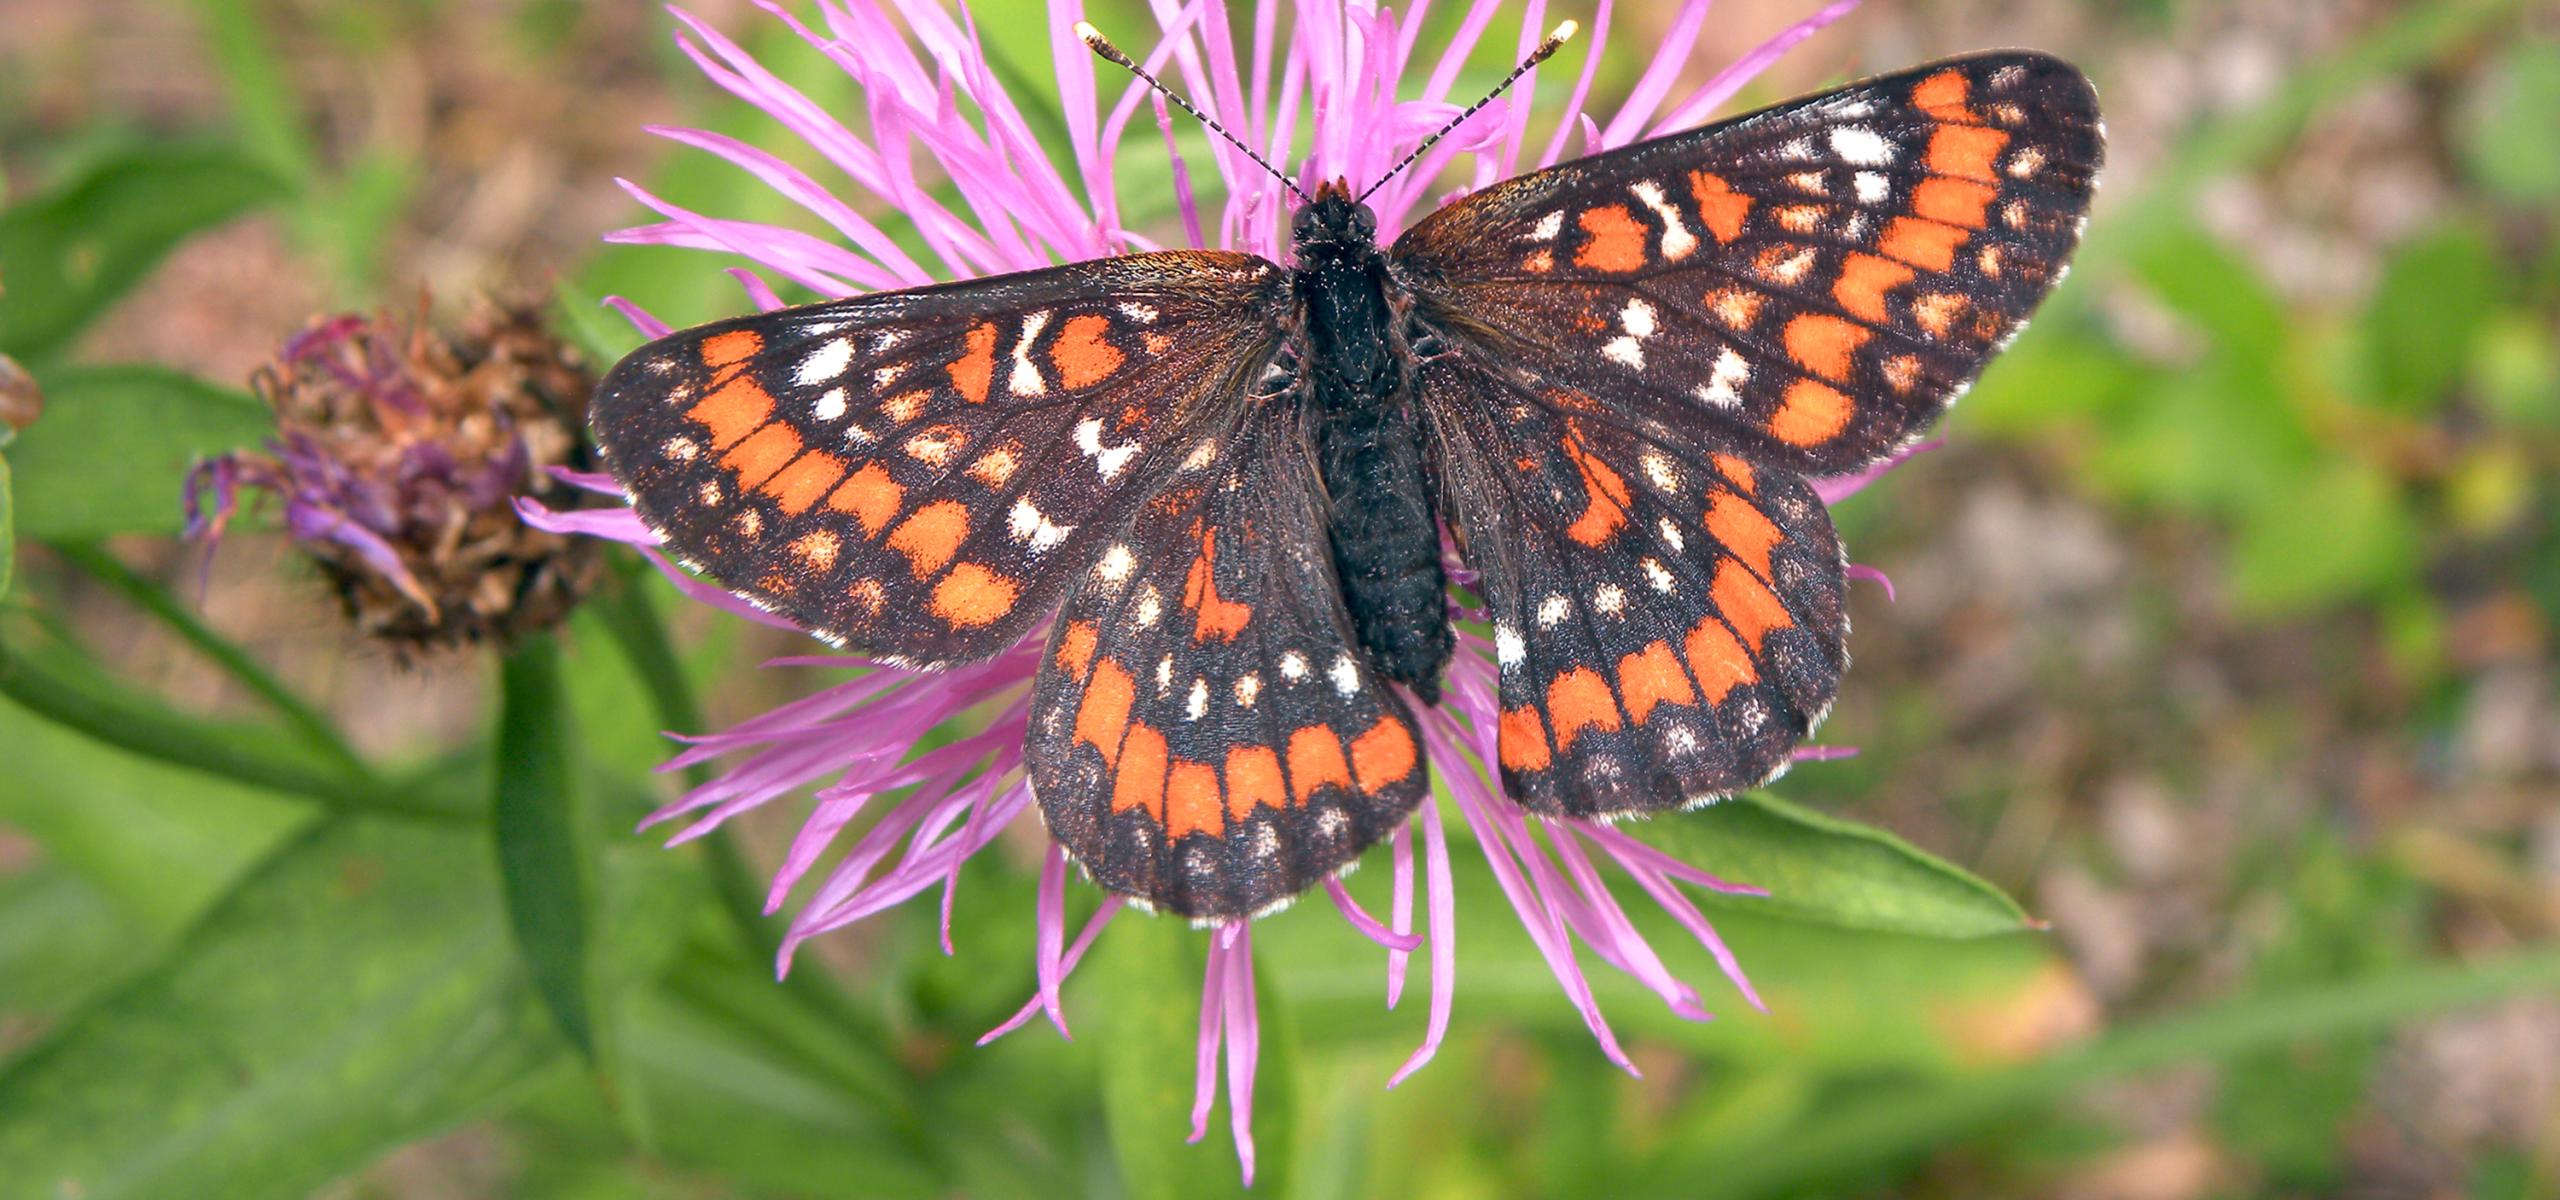 An orange-brown colored butterfly with wings sitting open on a pink flower